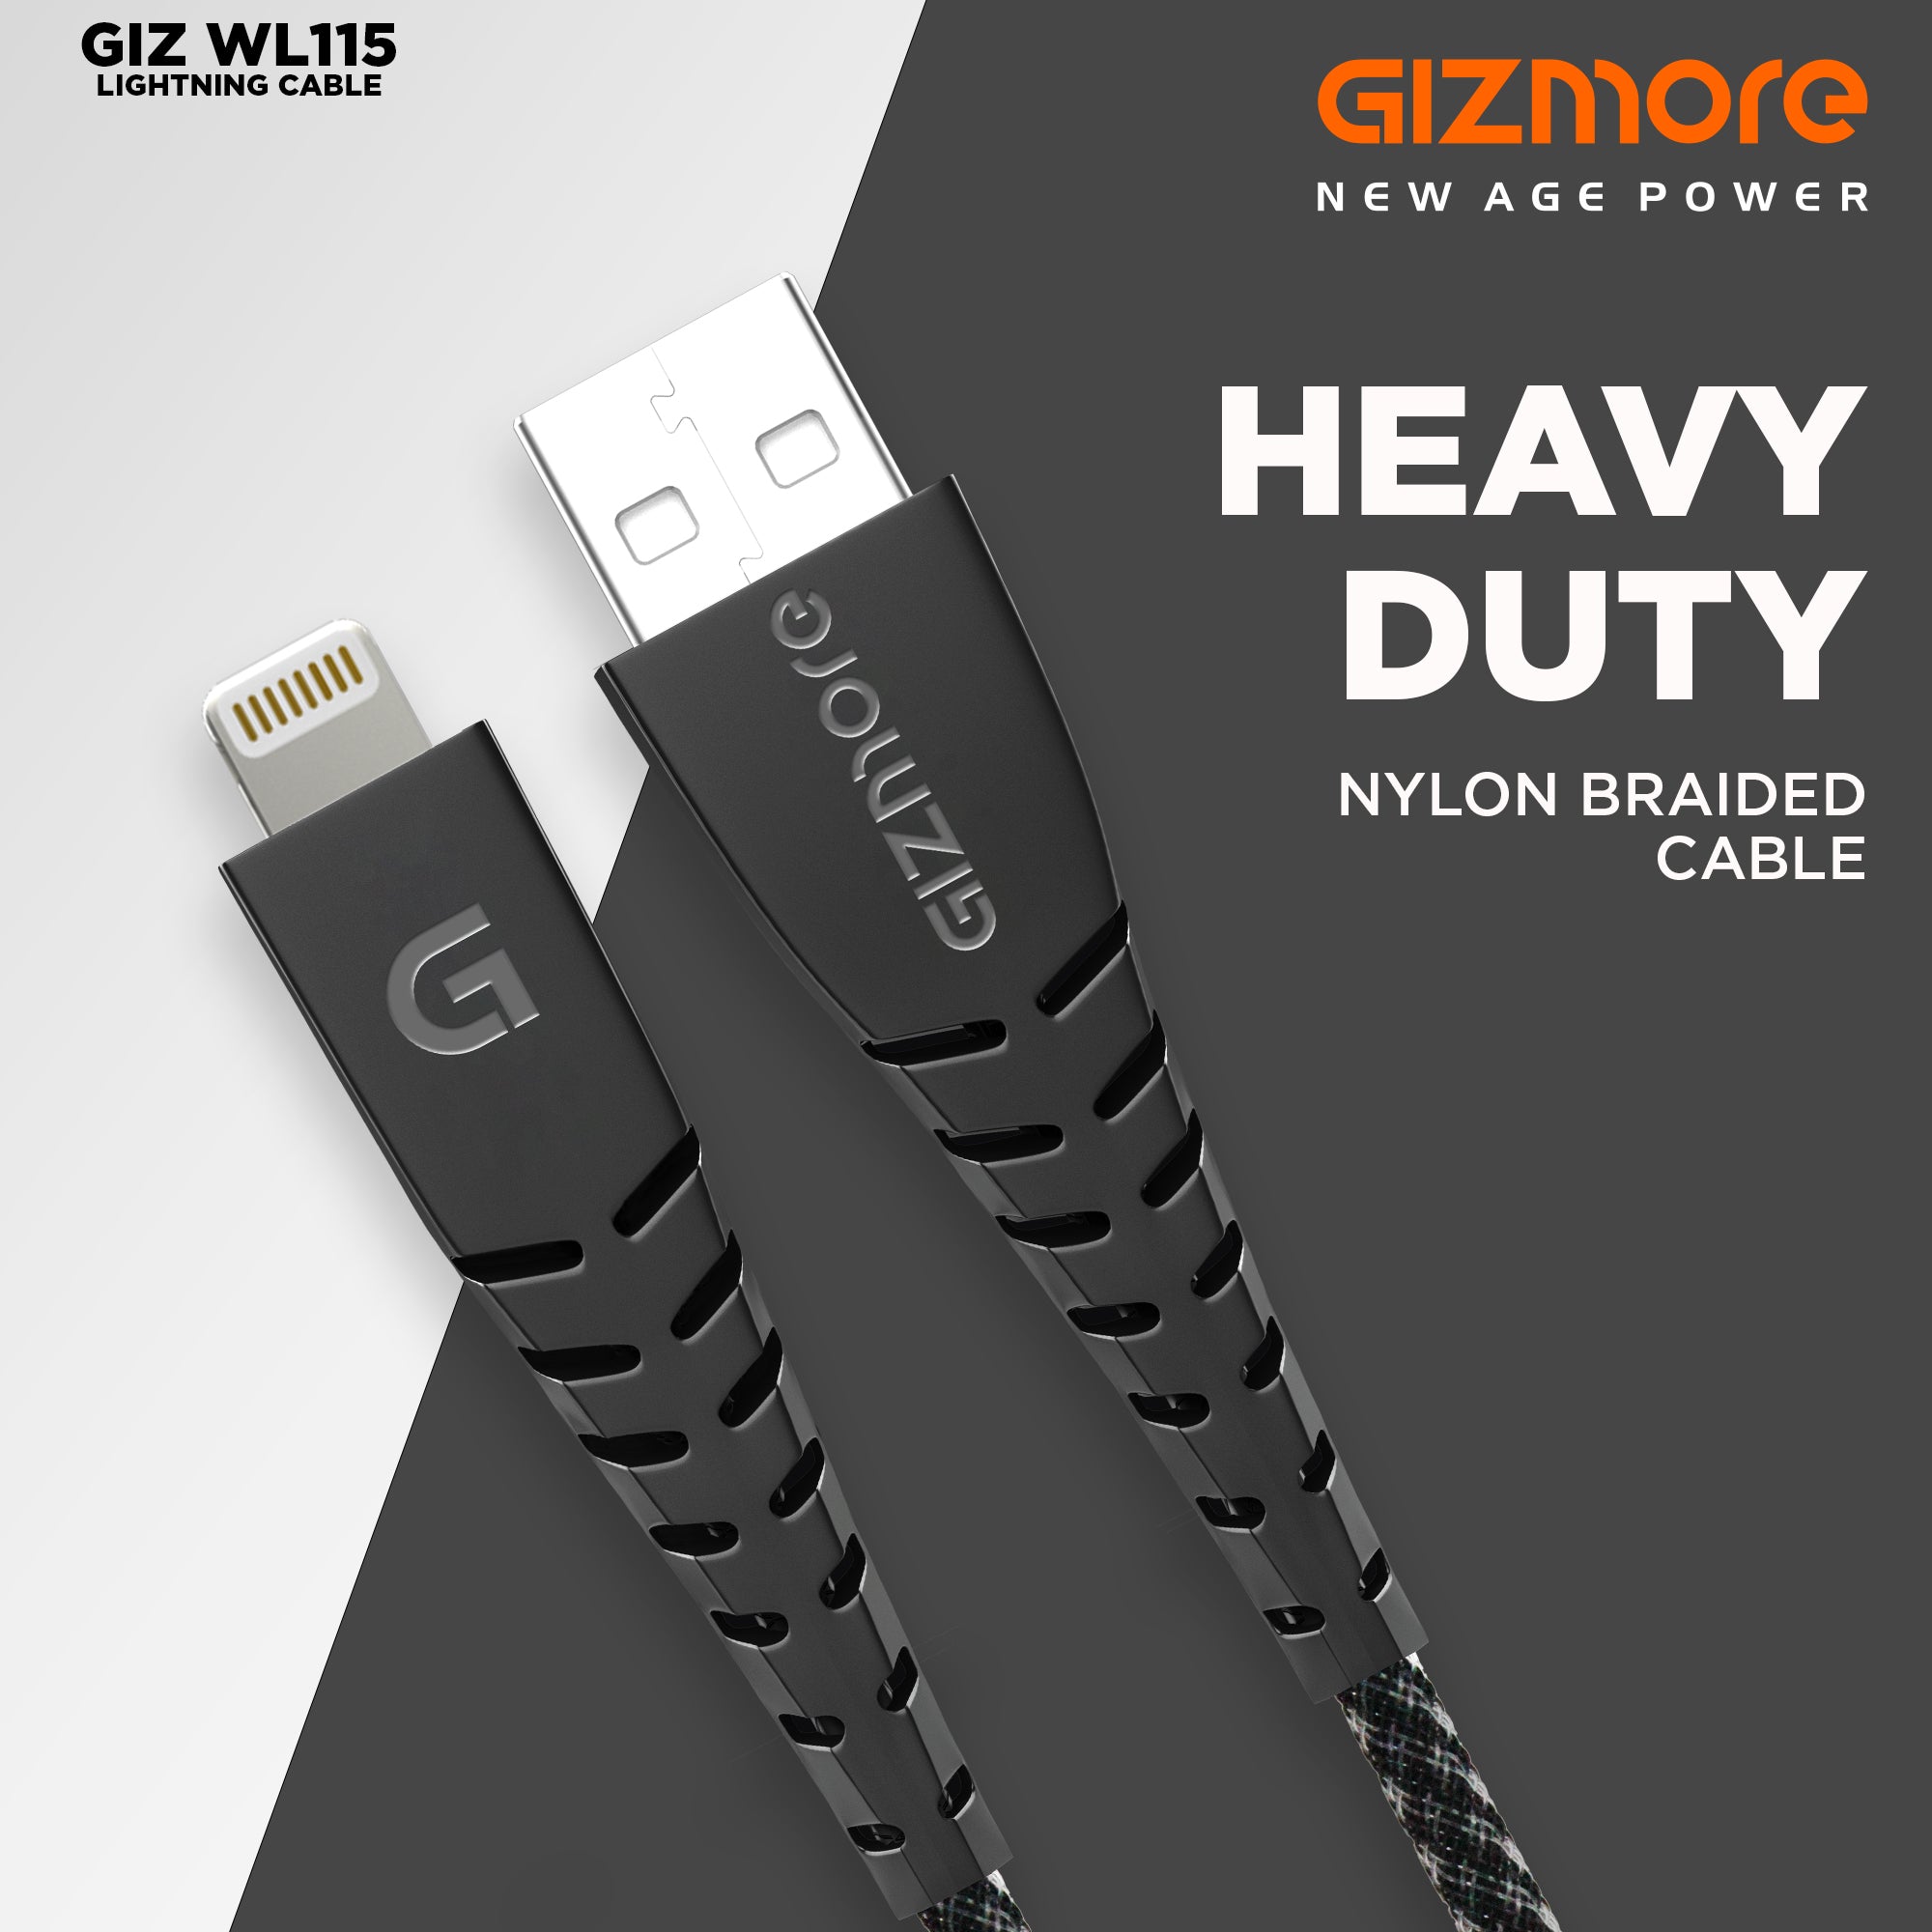 Gizmore Lightning Cable 2.4A (Compatible with Mobile, Tablet, Computer,)